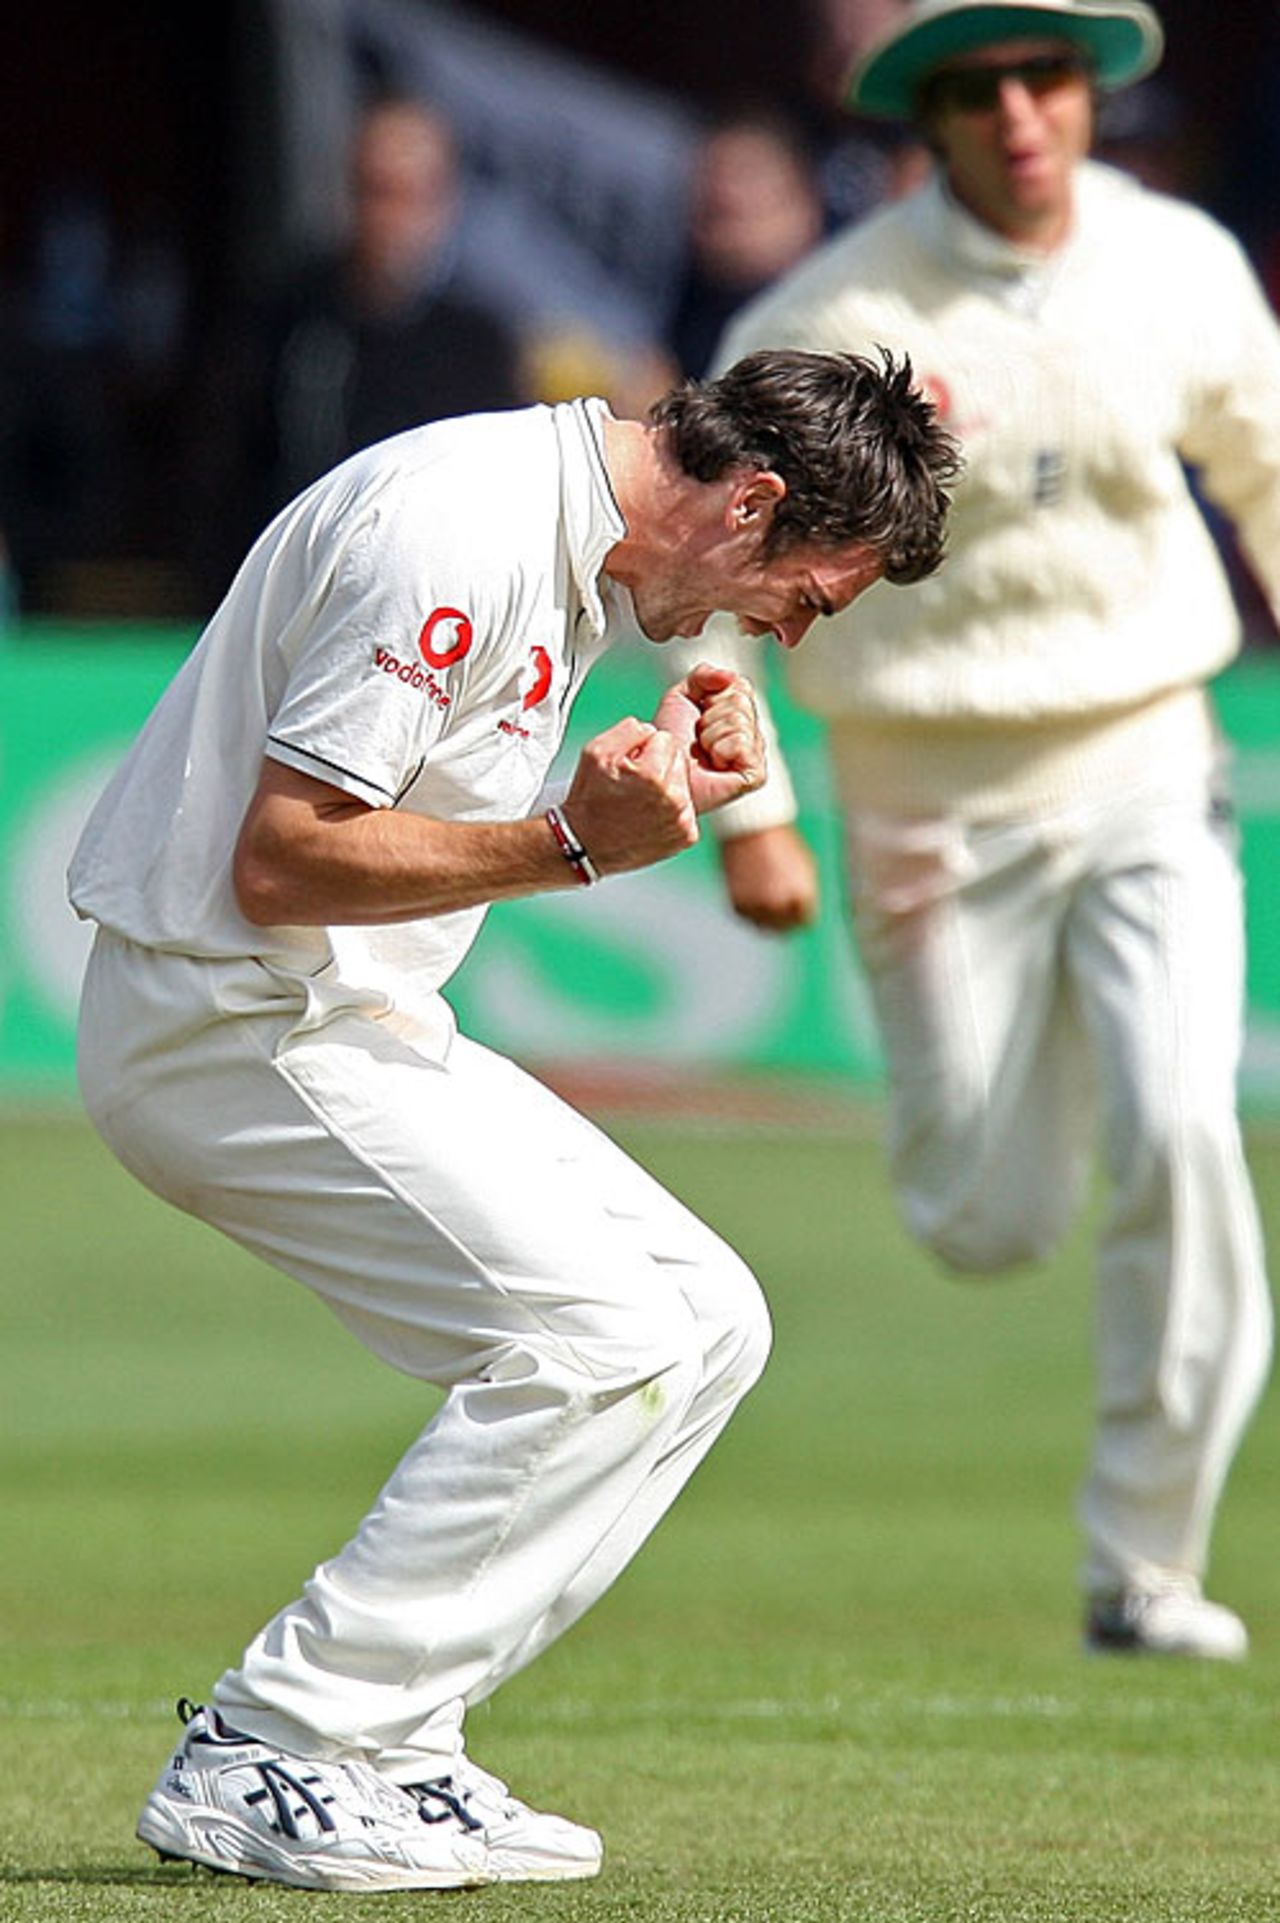 James Anderson celebrates Mathew Sinclair's wicket, New Zealand v England, 2nd Test, 3rd day, Wellington, March 16, 2008